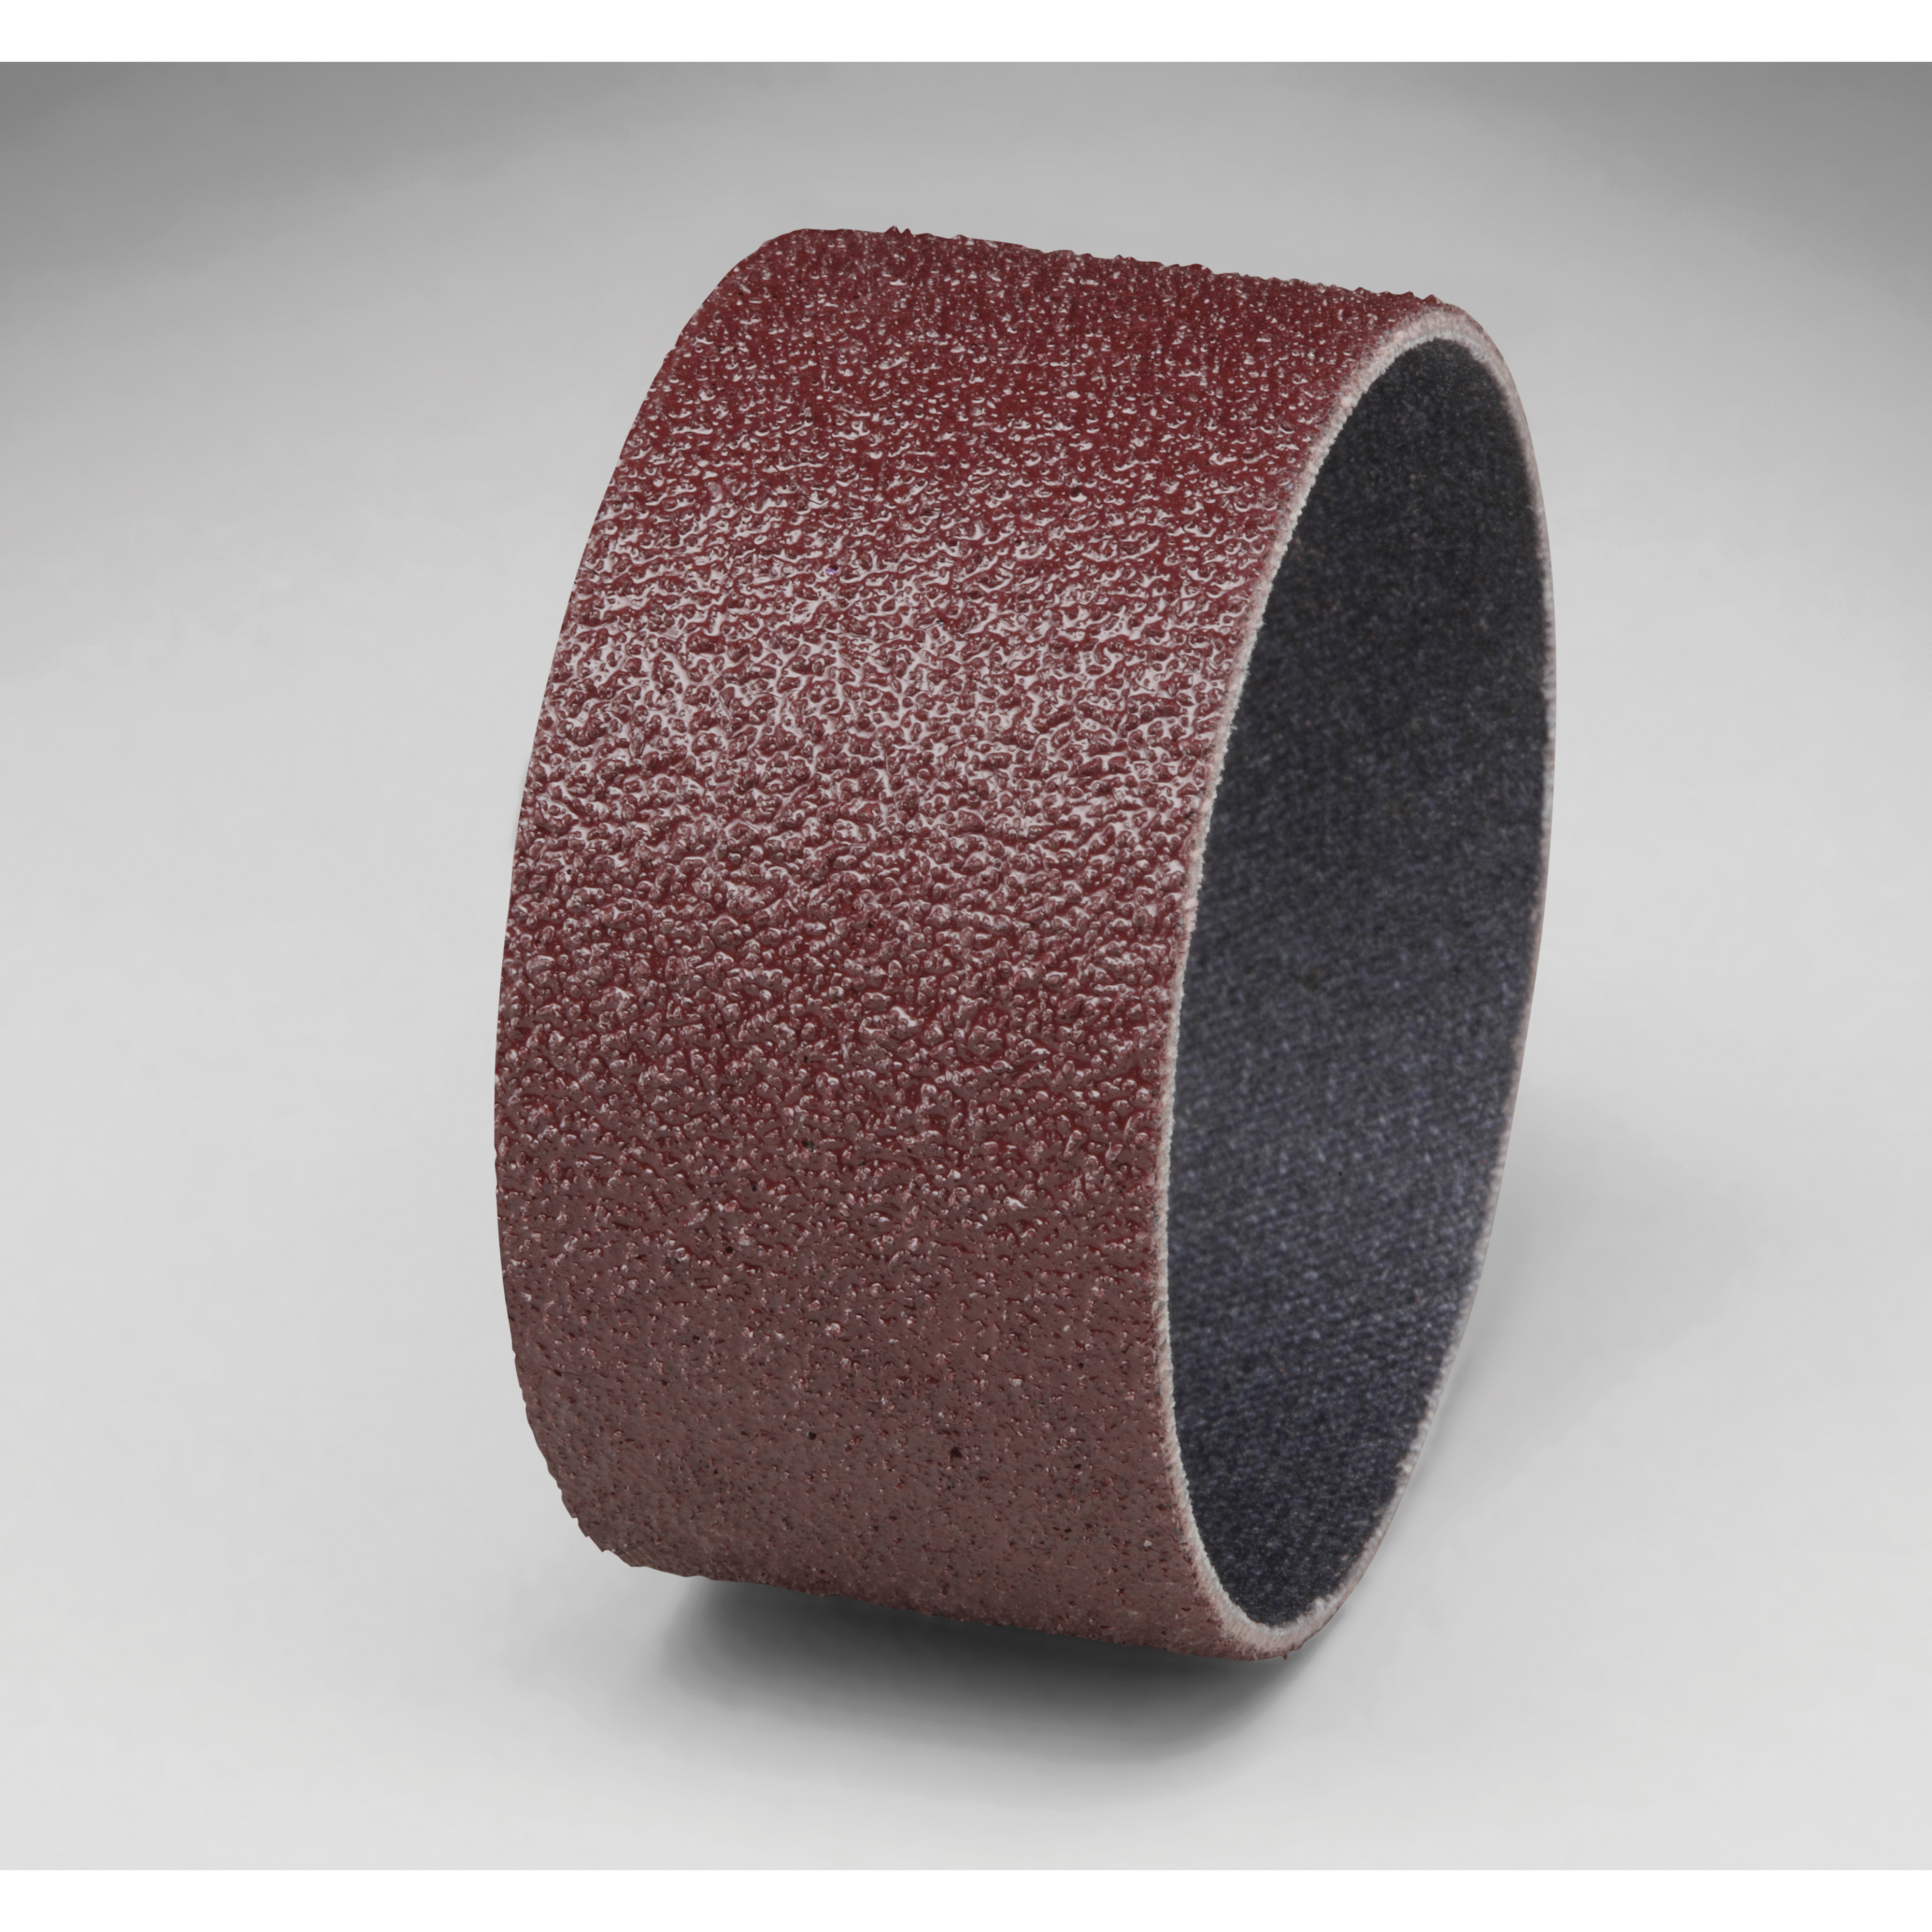 3M™ Evenrun™ 051144-97597 341D Coated Band, 2 in Dia x 1-1/2 in L Band, 36 Grit, Very Coarse Grade, Aluminum Oxide Abrasive